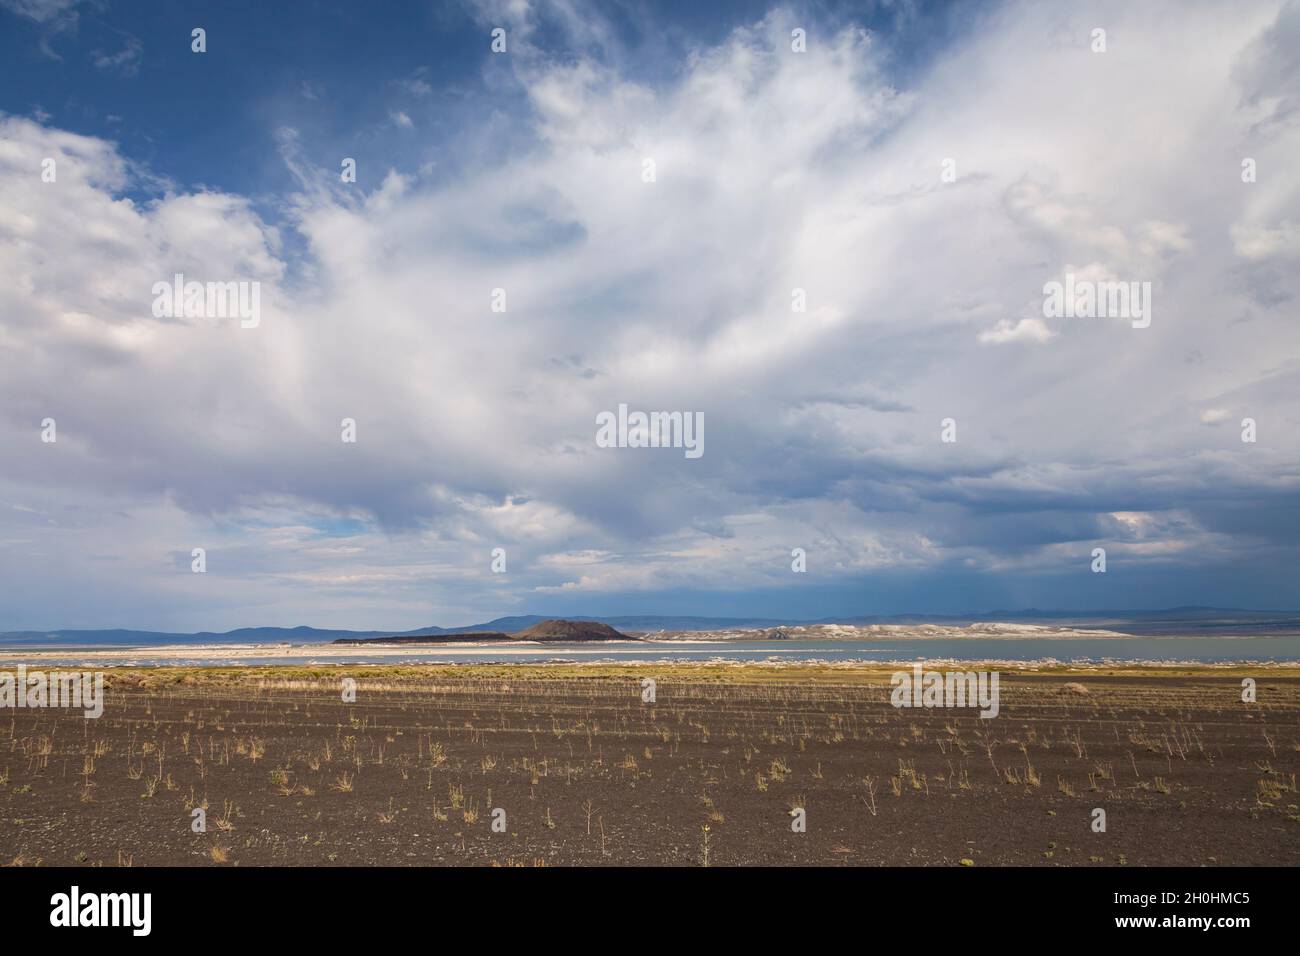 The diversion of water away from the lake has exposed the shoreline of Mono Lake in Mono County, California. Stock Photo